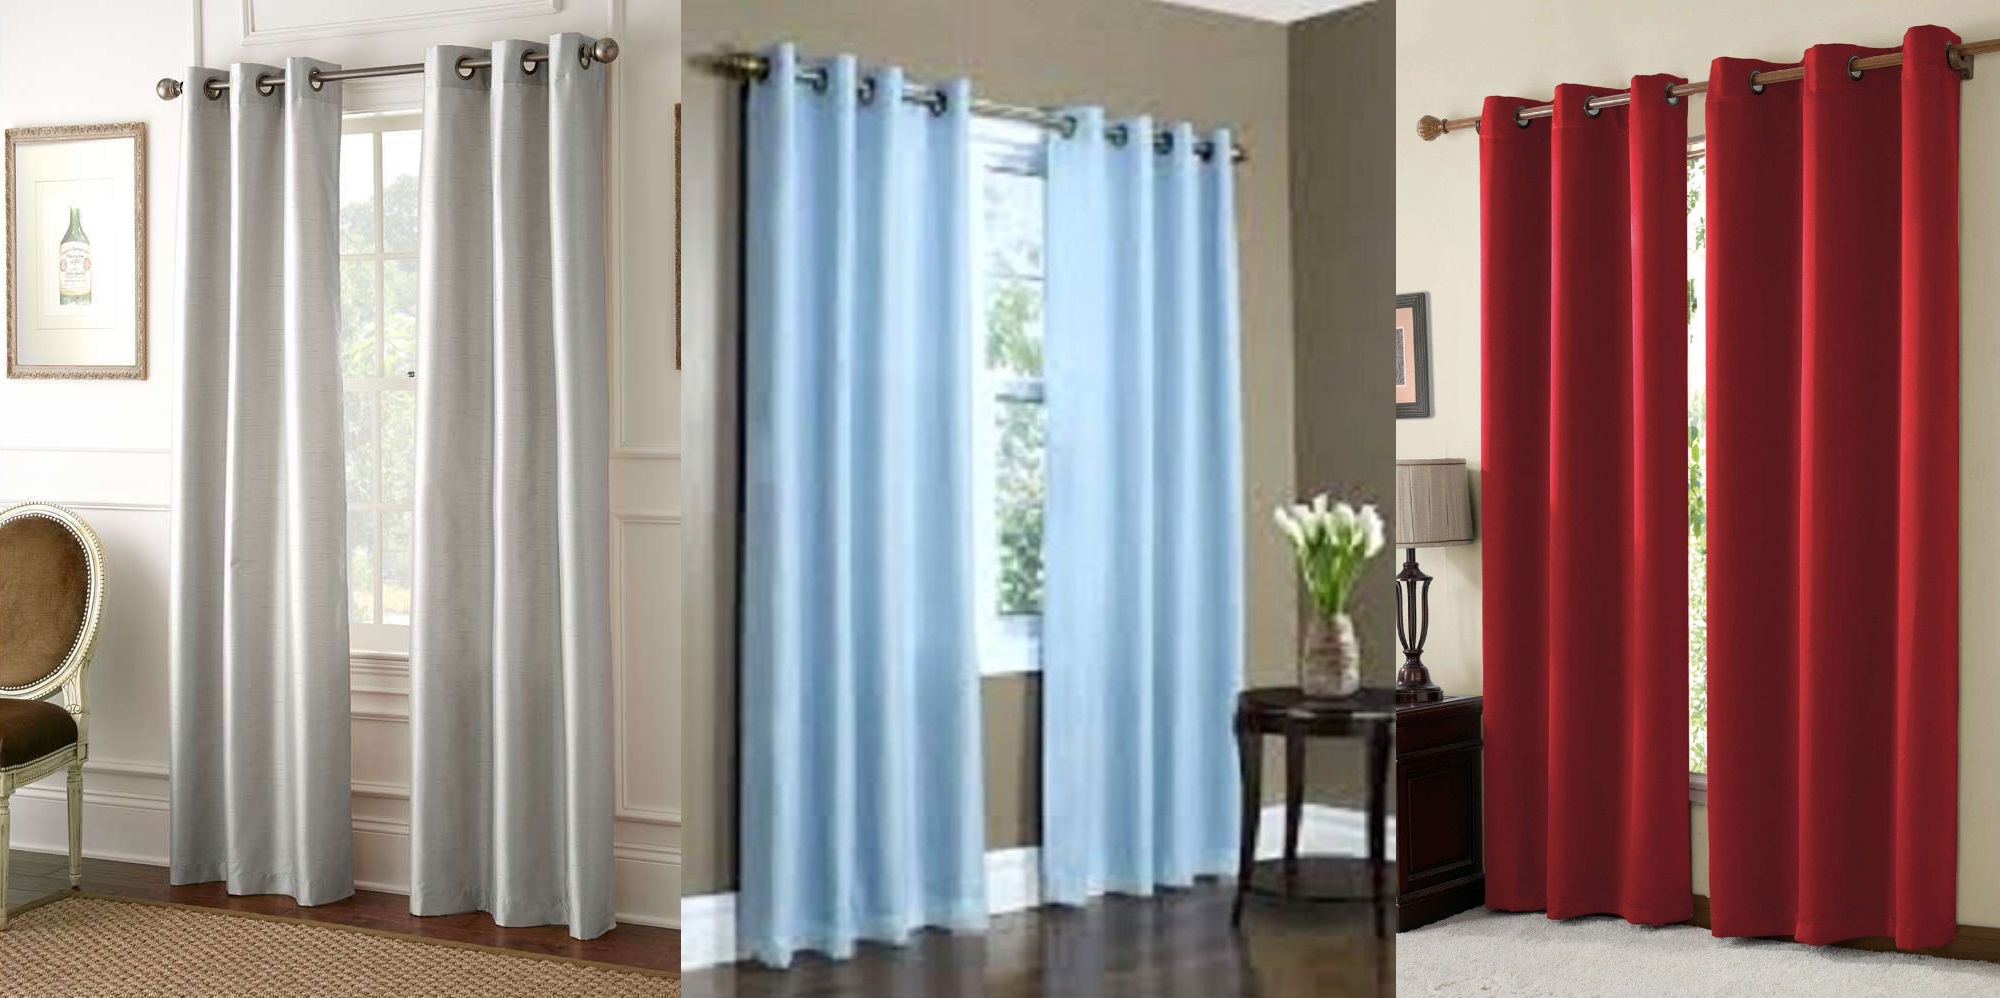 TWO Solid Panel Lined Thermal Blackout Curtain Panels Only $10! Up to 108 Inches High!